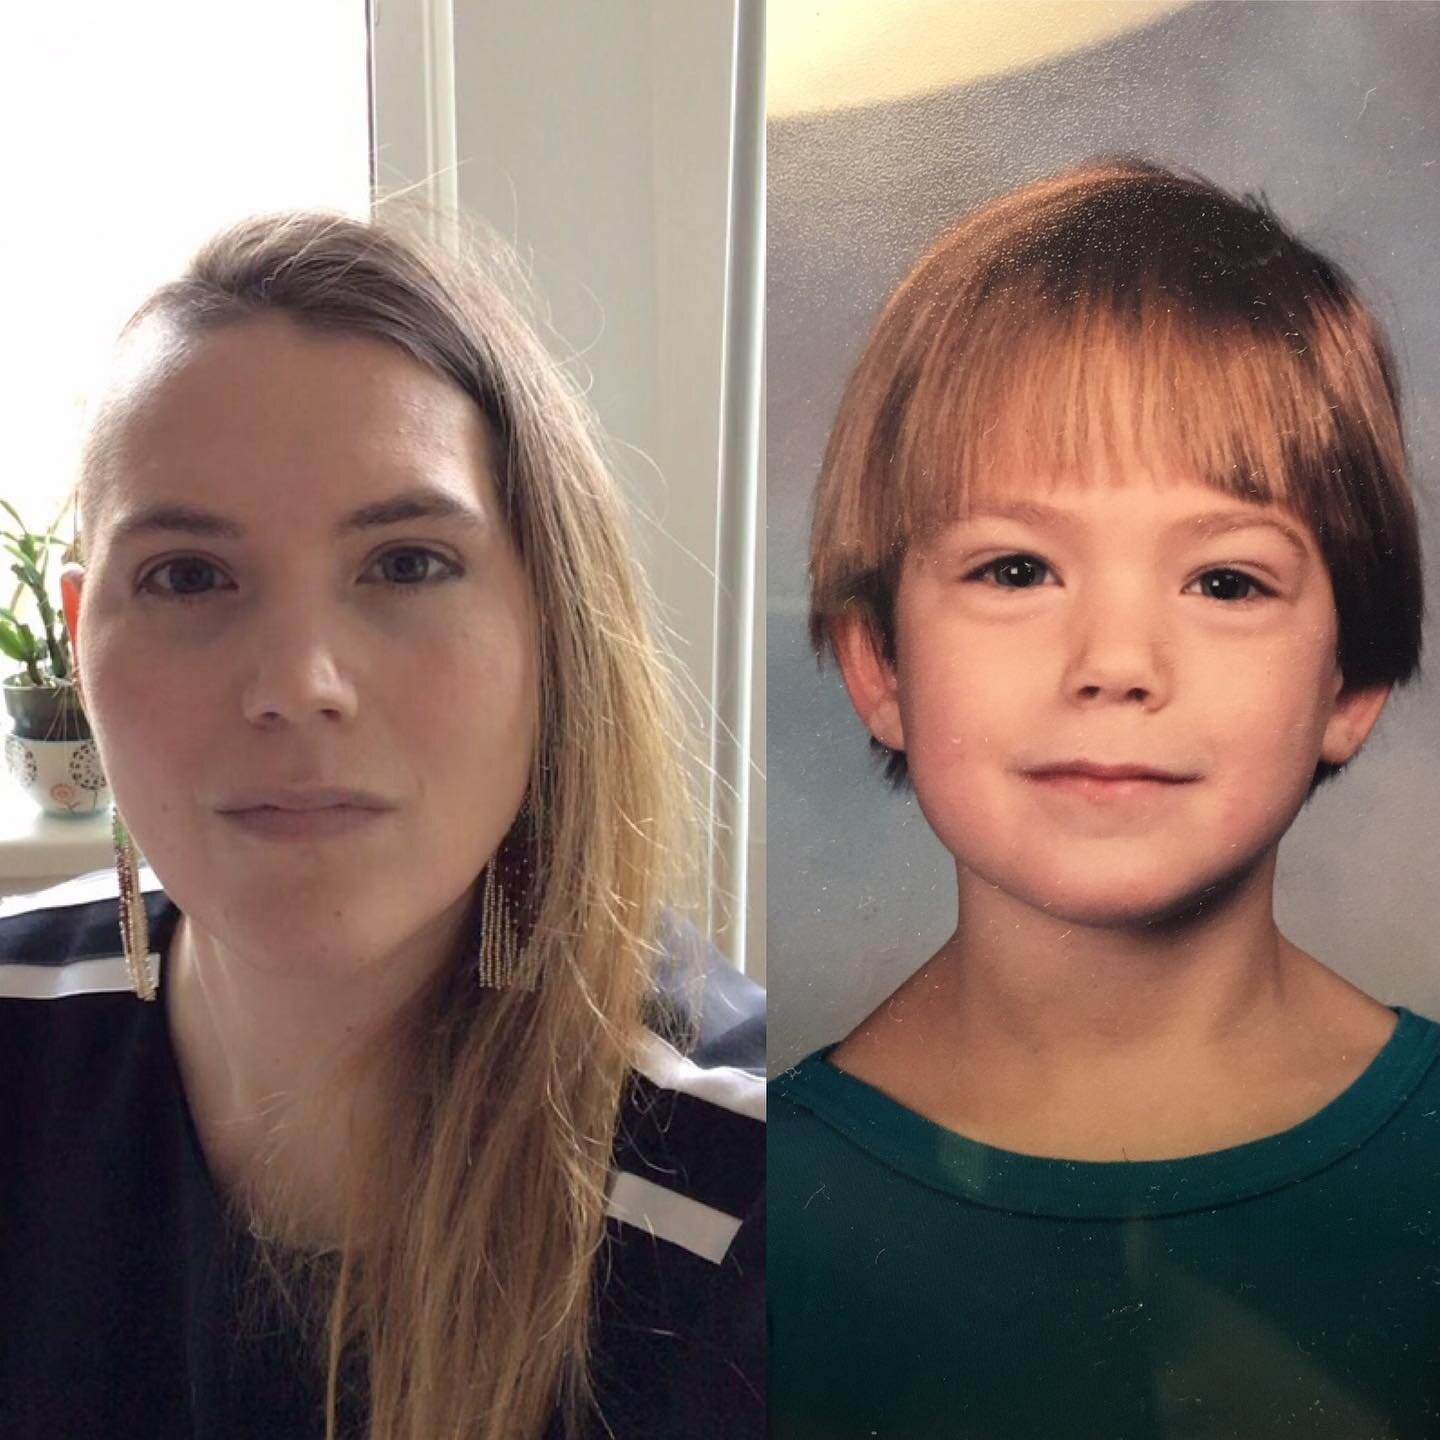 Found these photos and I can&rsquo;t stop laughing 😂 I guess 4-year-old me was just as skeptical of the status quo as present me, and rocking an asymmetrical haircut (although that one was far less intentional-look at my ears 😂)